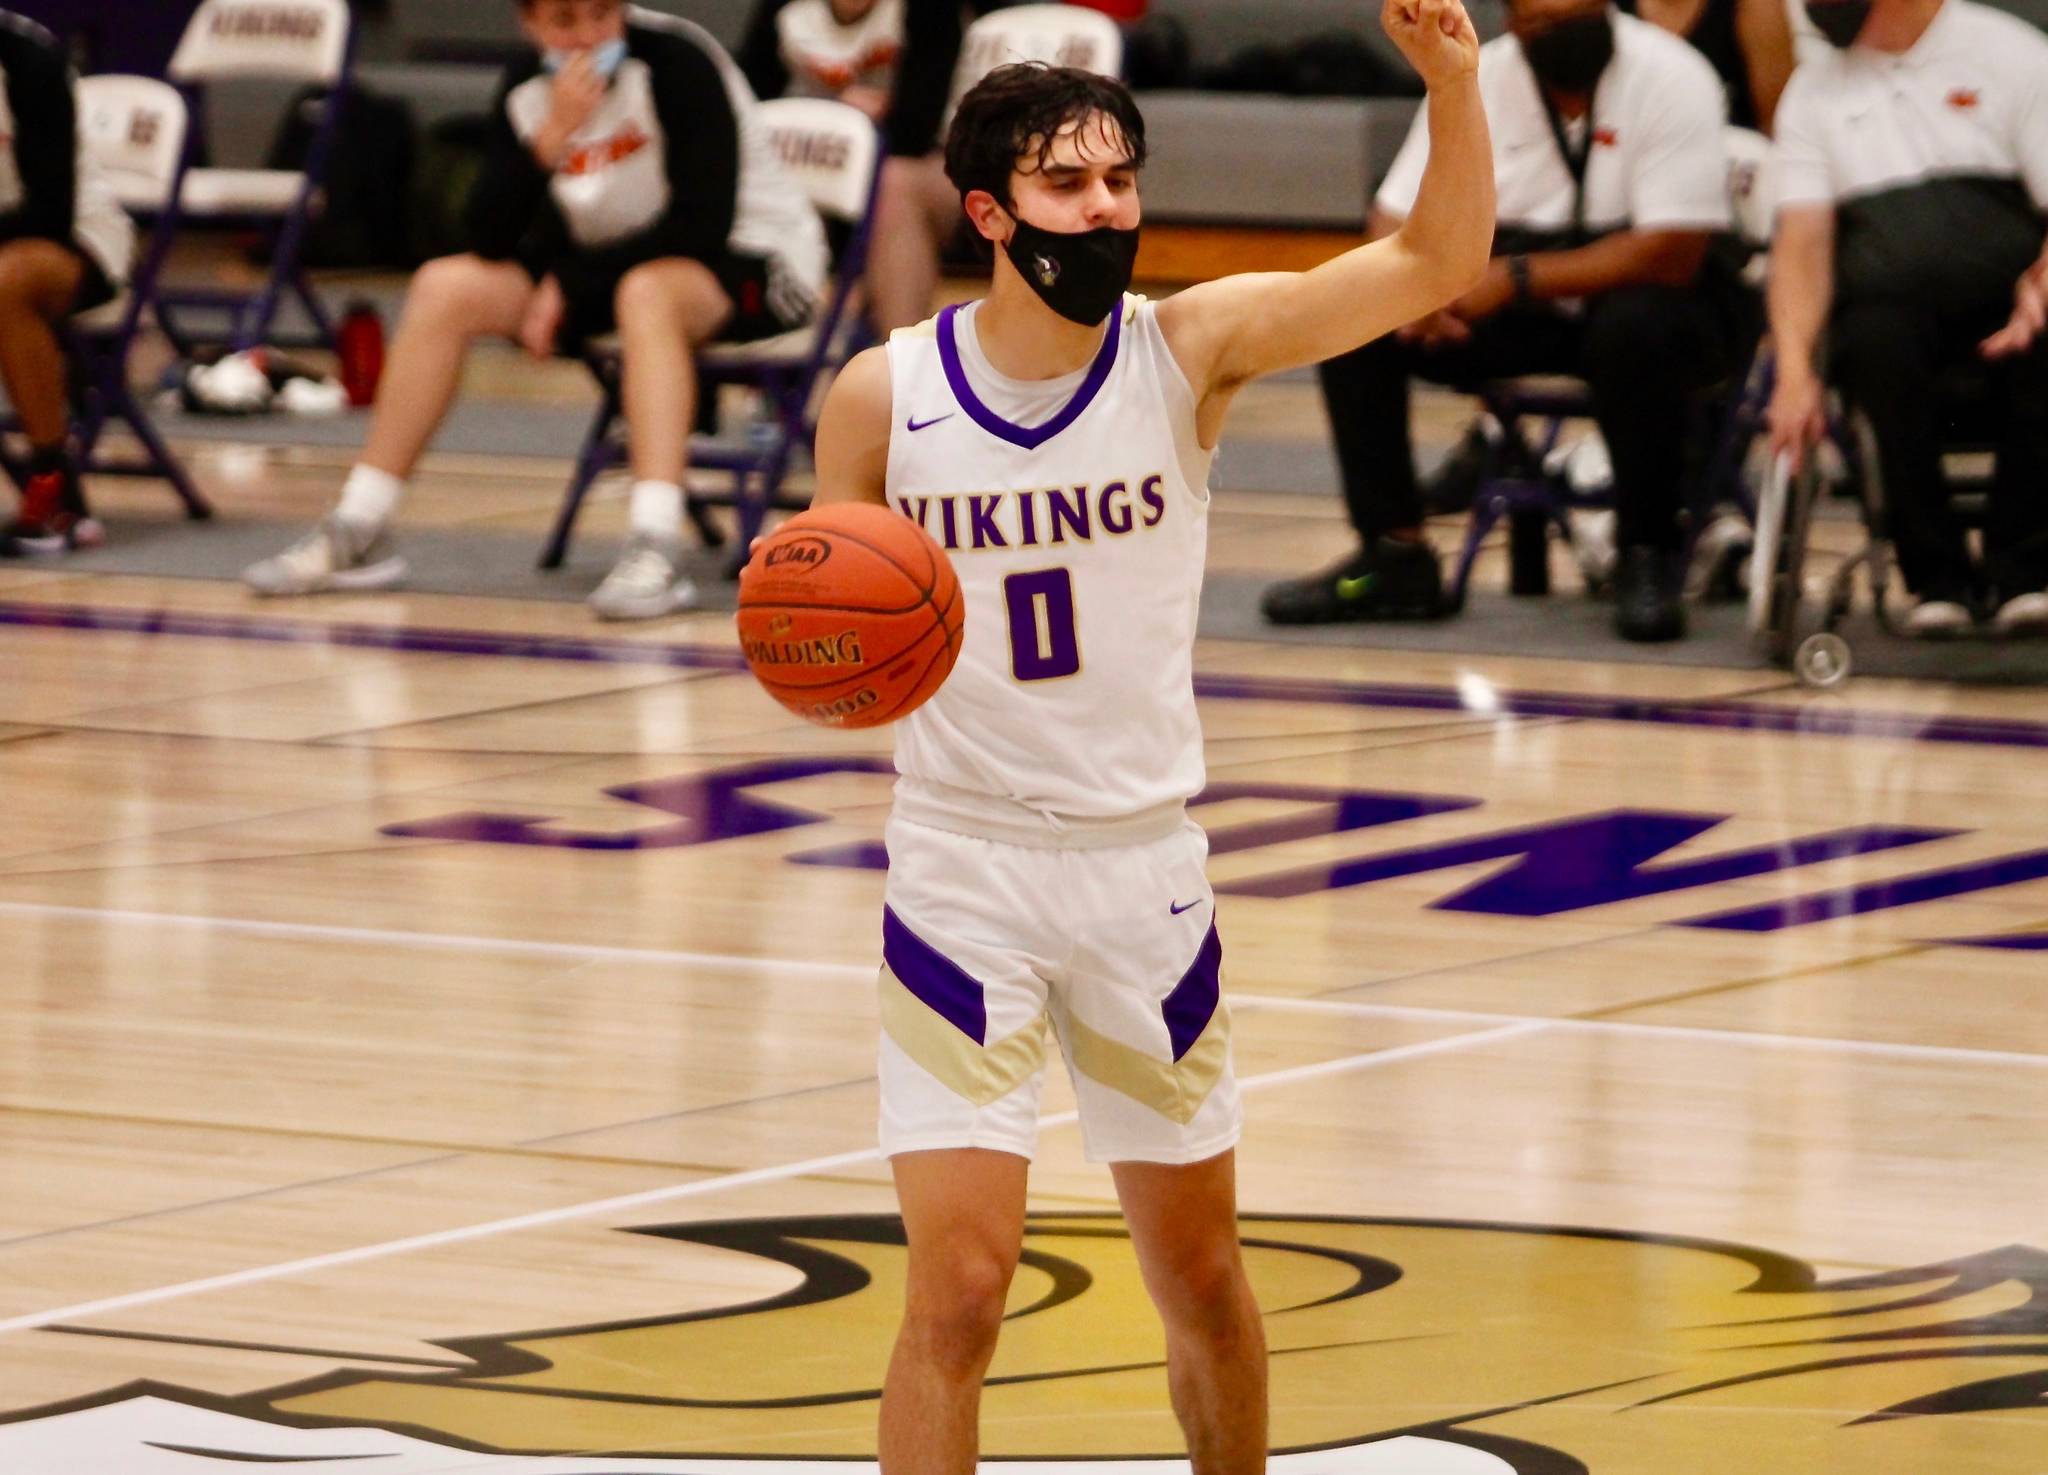 Johny Olmsted calls the play as he directs the offense against Central Kitsap. Olmsted led North Kitsap with 26 points in the 79-51 victory. (Mark Krulish/Kitsap News Group)